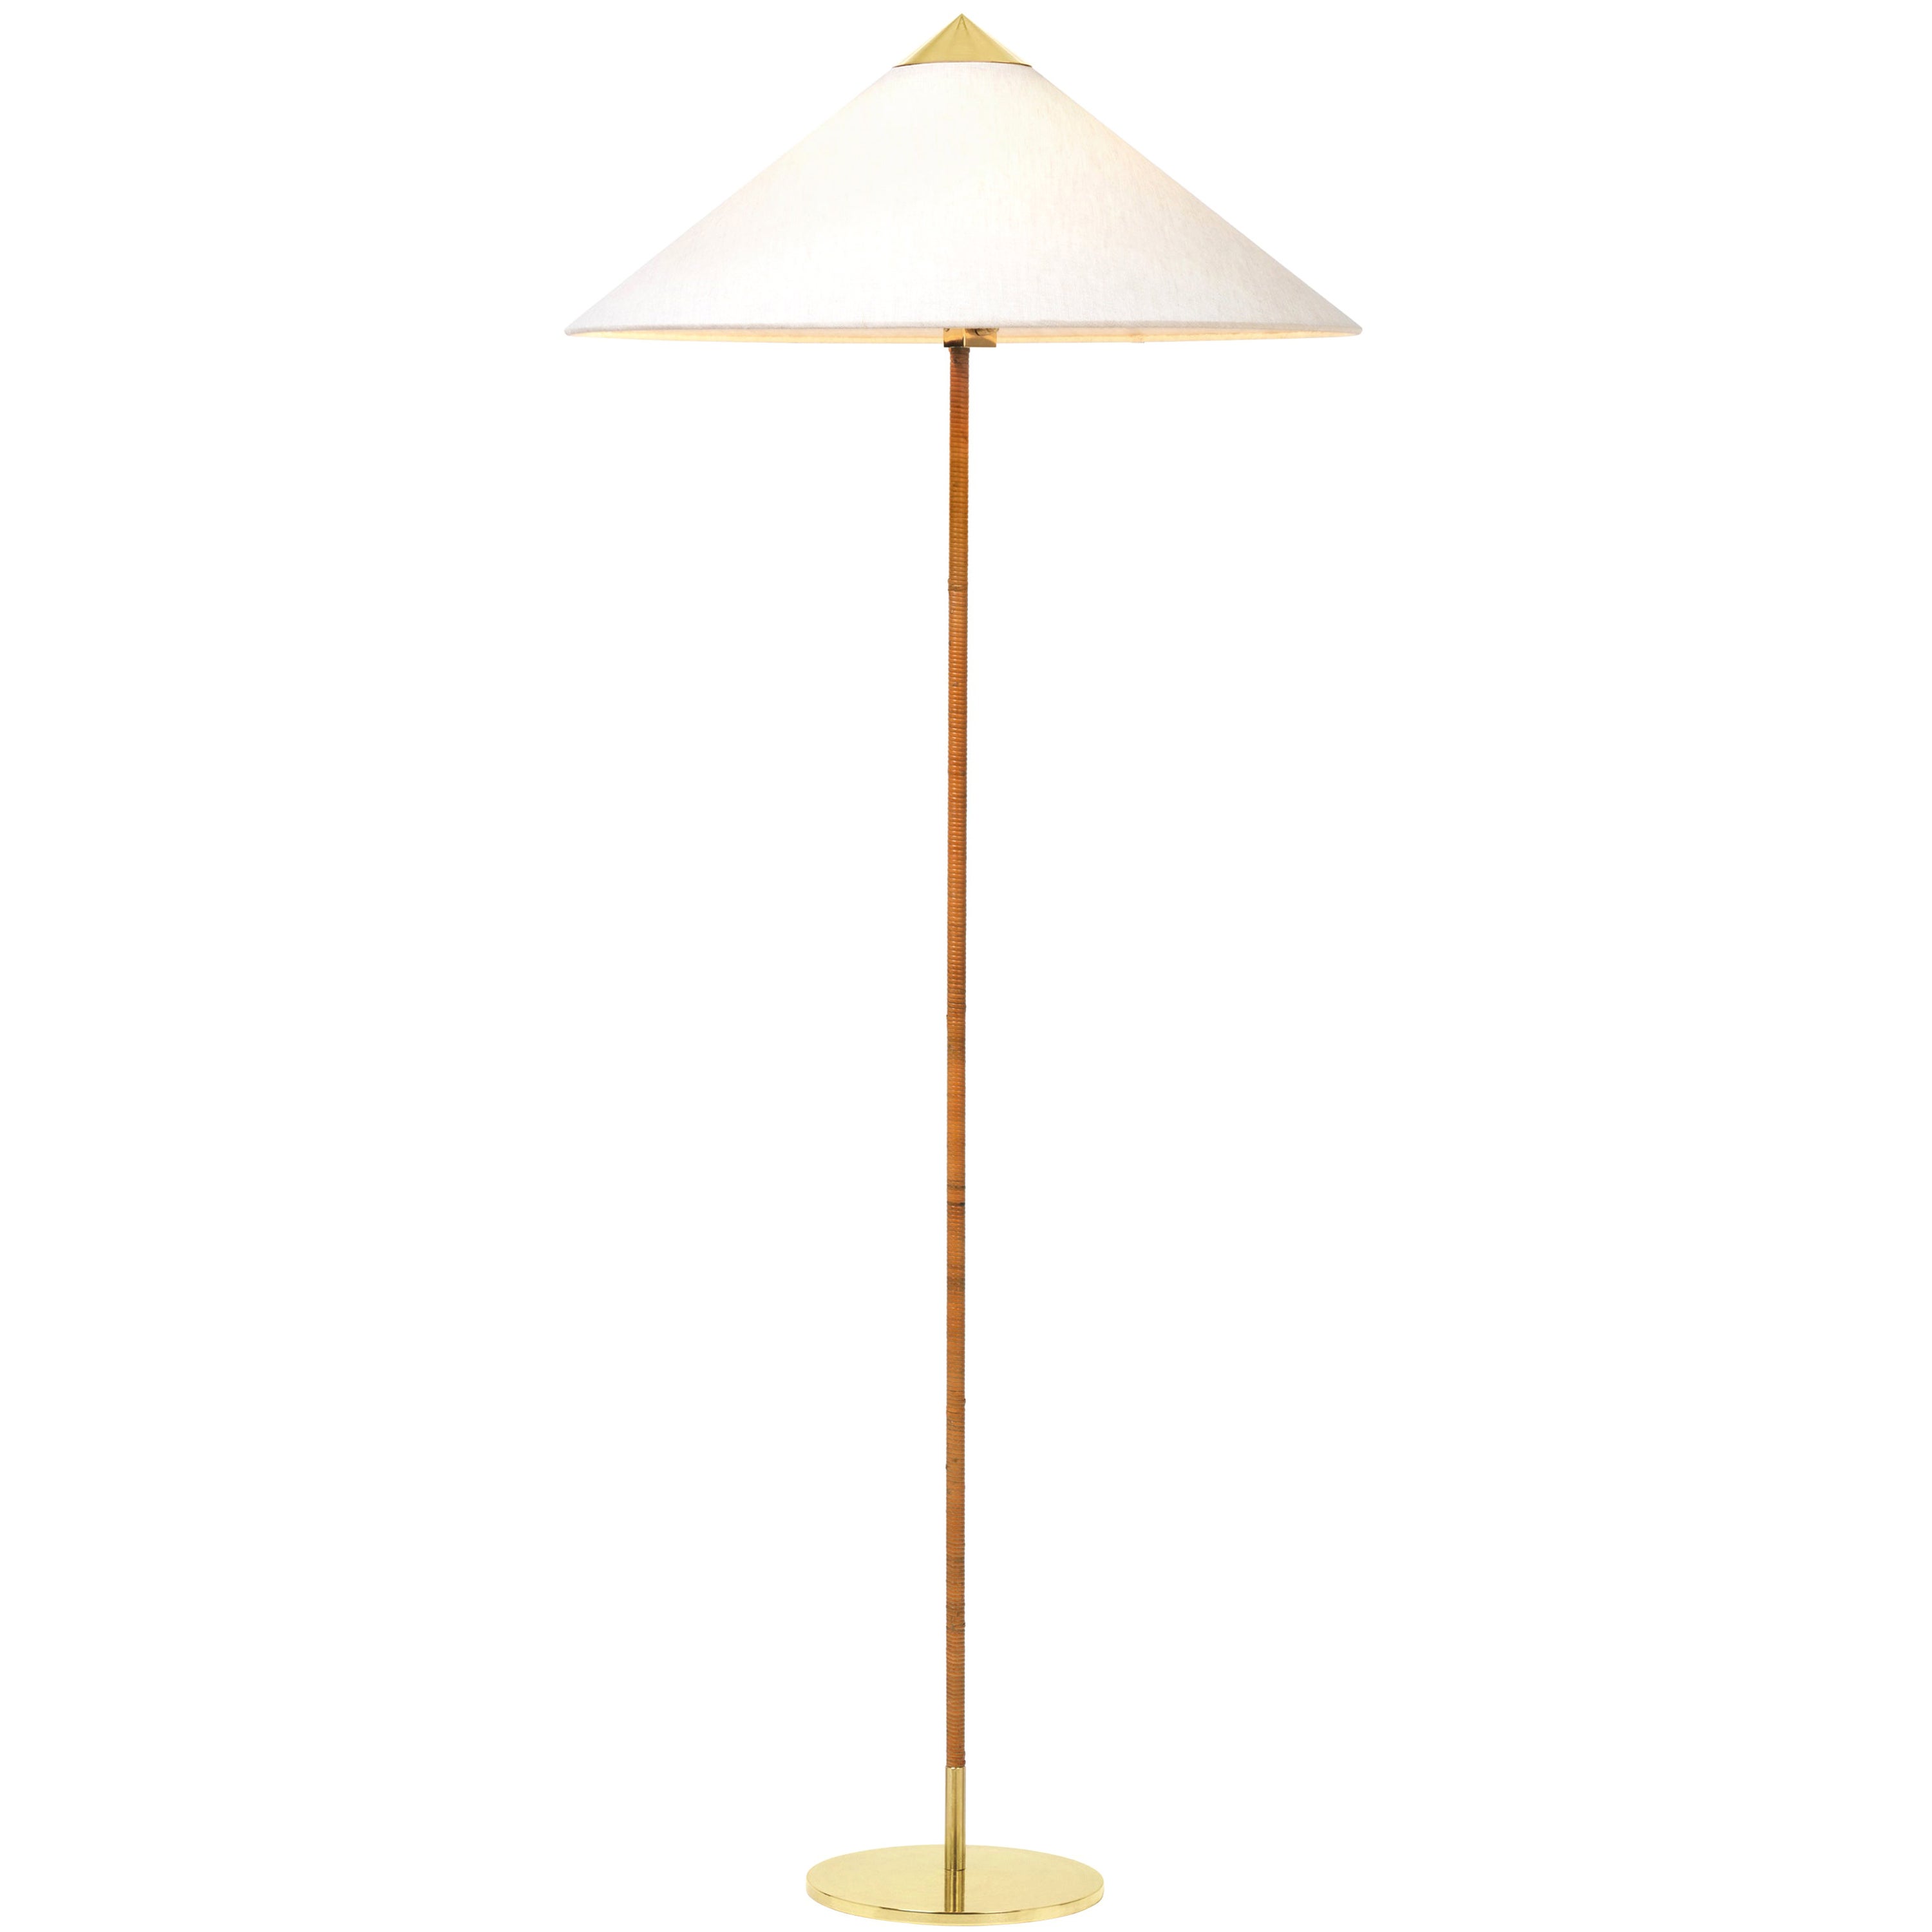 Paavo Tynell Model 9602 Brass and Rattan Floor Lamp with Canvas Shade